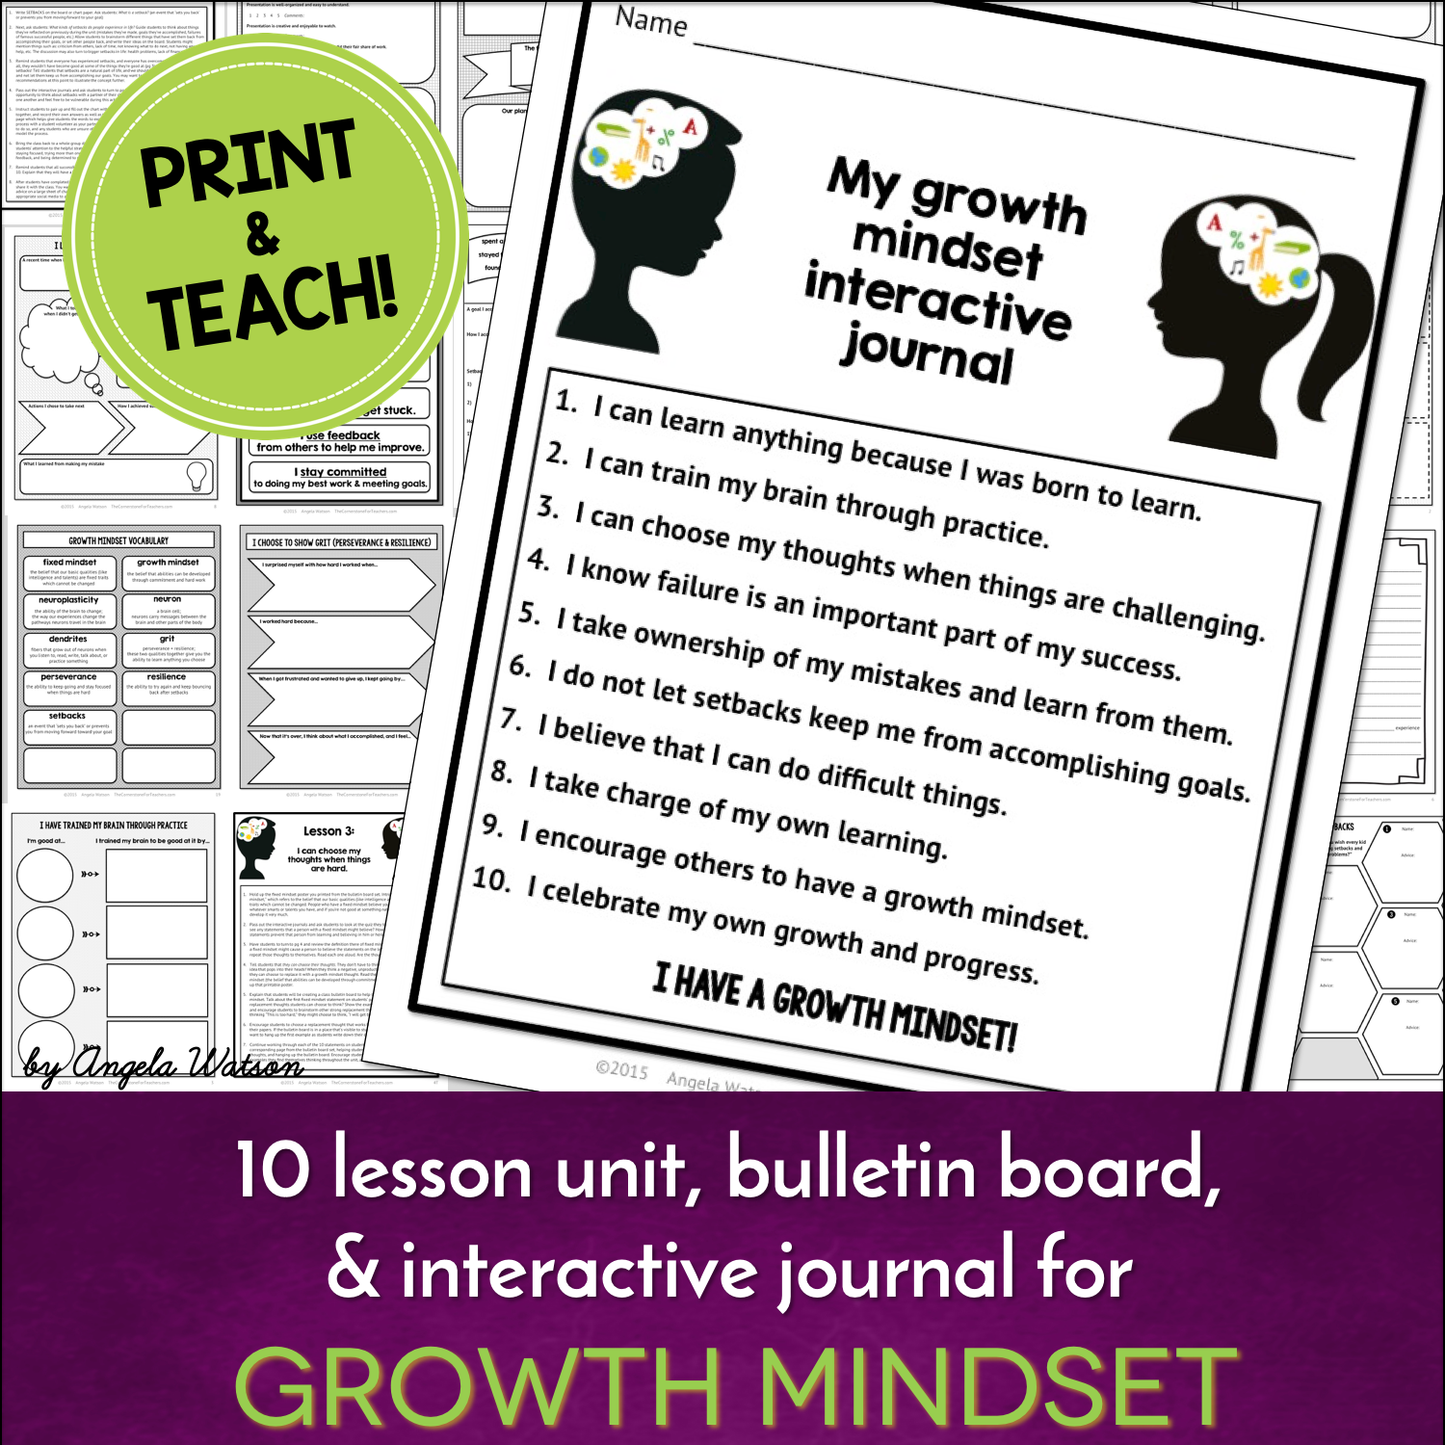 Growth Mindset 10-Lesson Unit, Bulletin Board, and Interactive Journal